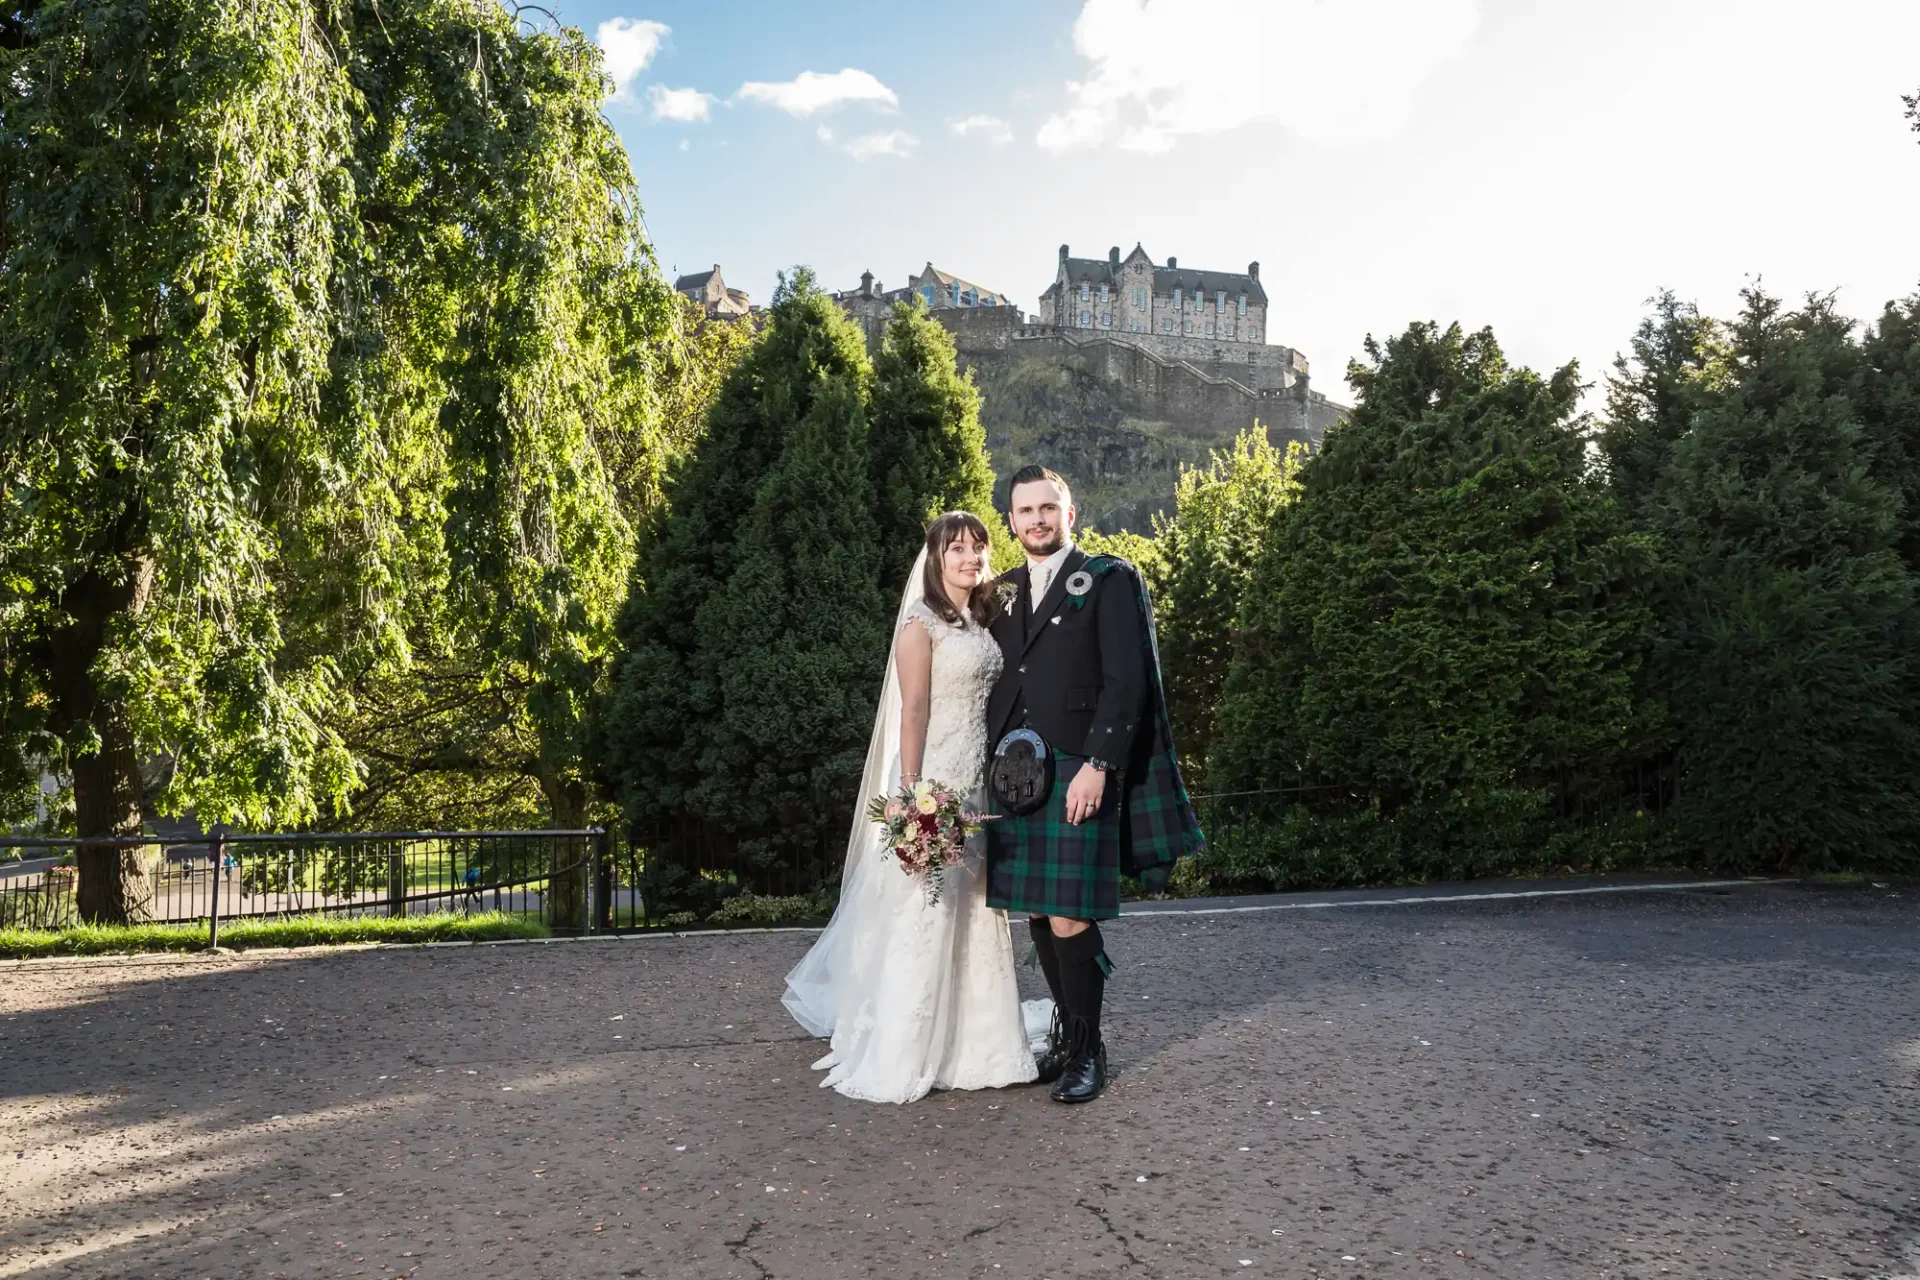 A bride in a white dress and a groom in a kilt stand in a park with edinburgh castle in the background.